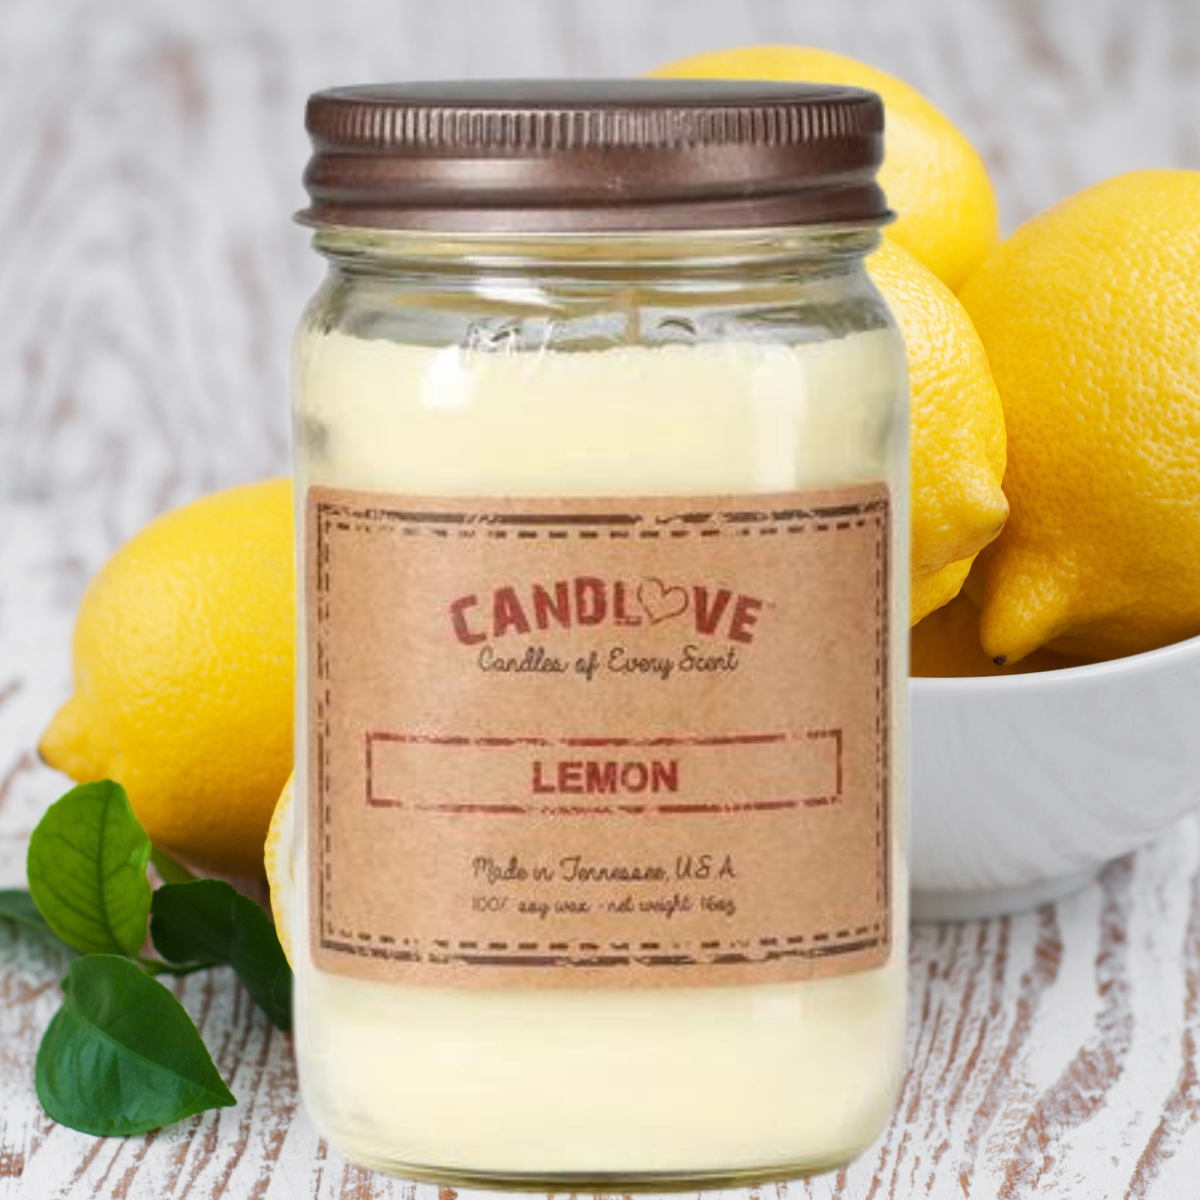 Picture of PPI SUPPLIES Lemon-C Candlove Lemon Scented Candle - Non-Toxic 100% Soy Candle - Handmade & Hand Poured Long Burning Candle - Highly Scented All Natural Clean Burning Candle (16 OZ Mason Jar) Made in The USA